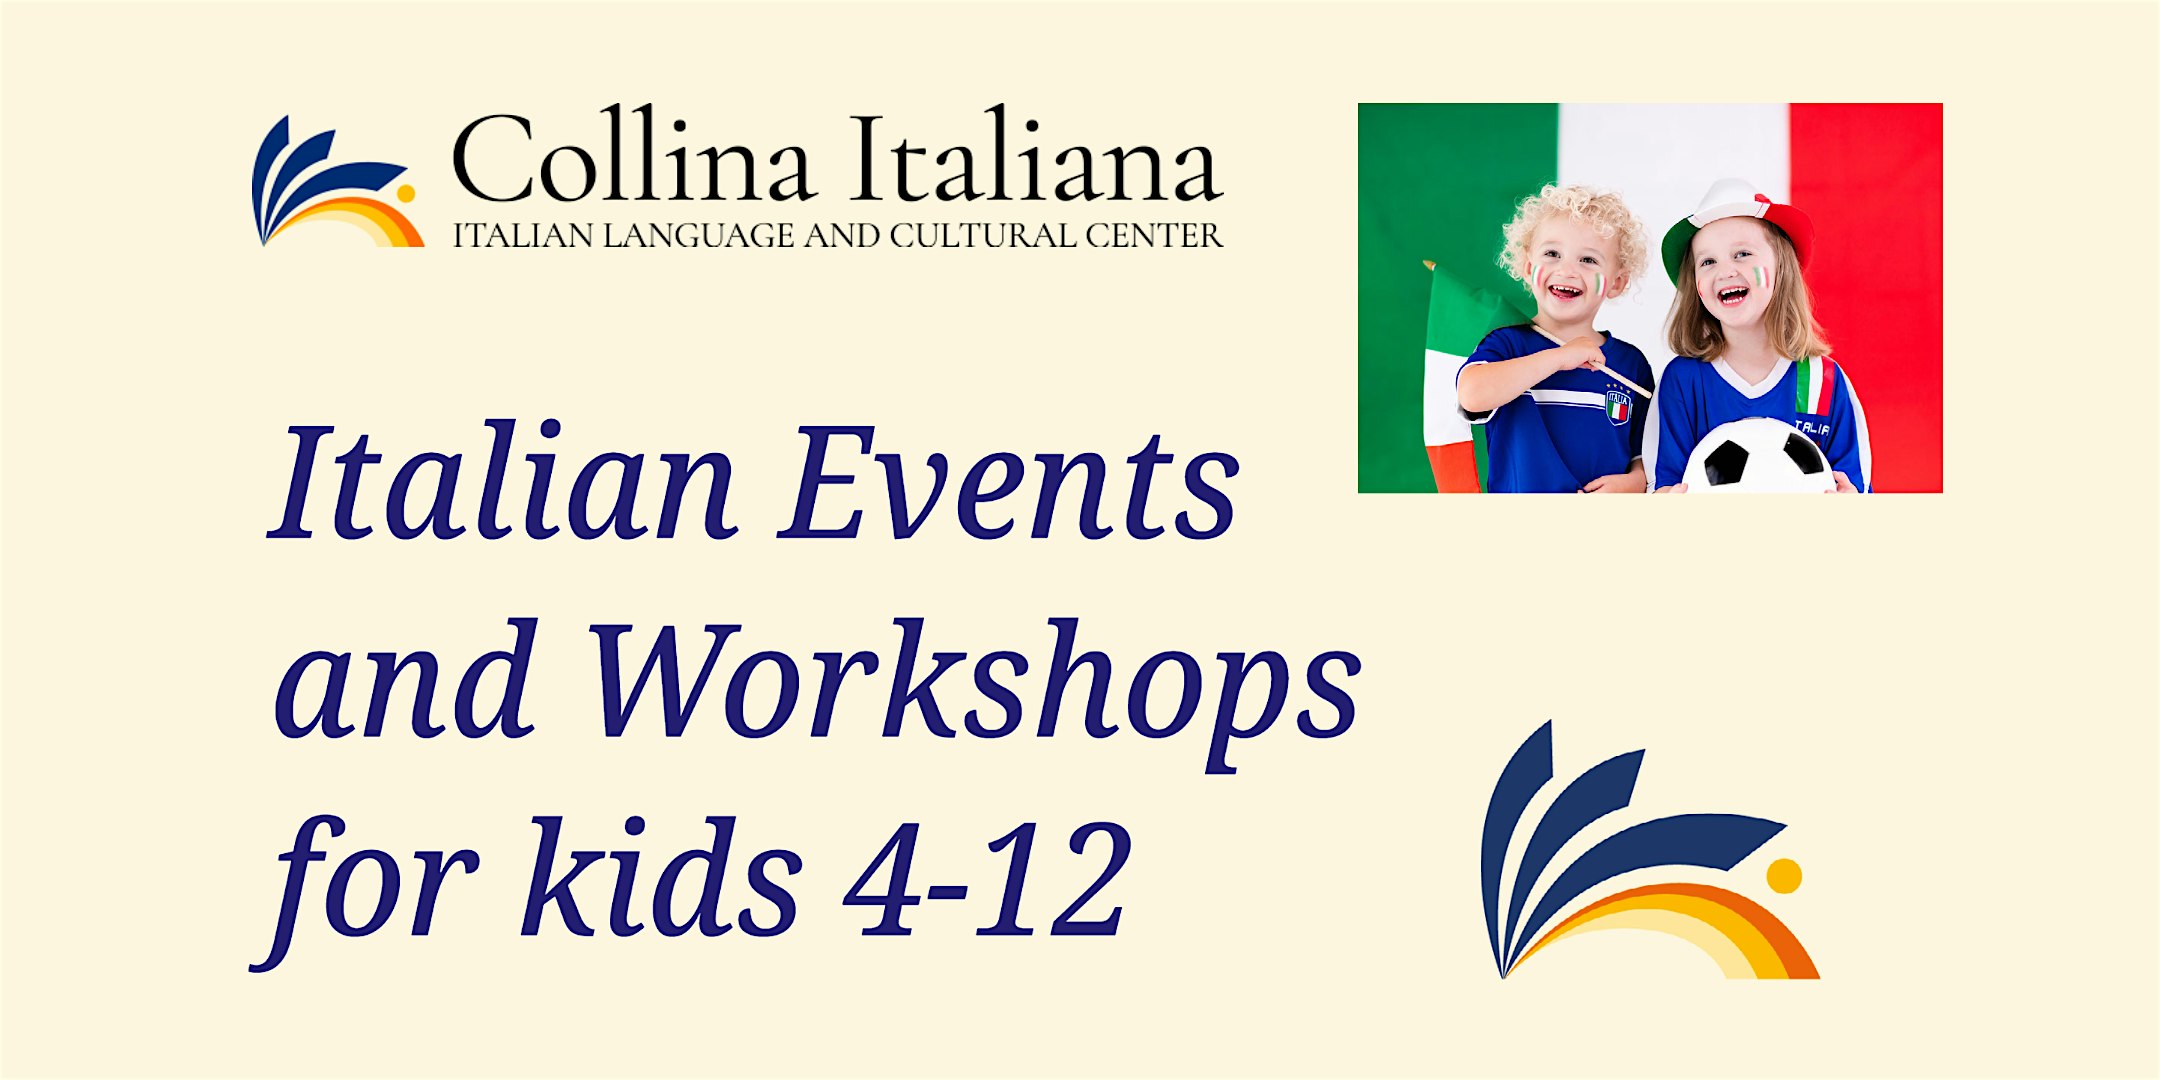 Italian Events for Kids (4-12) - WINTER HOLIDAYS